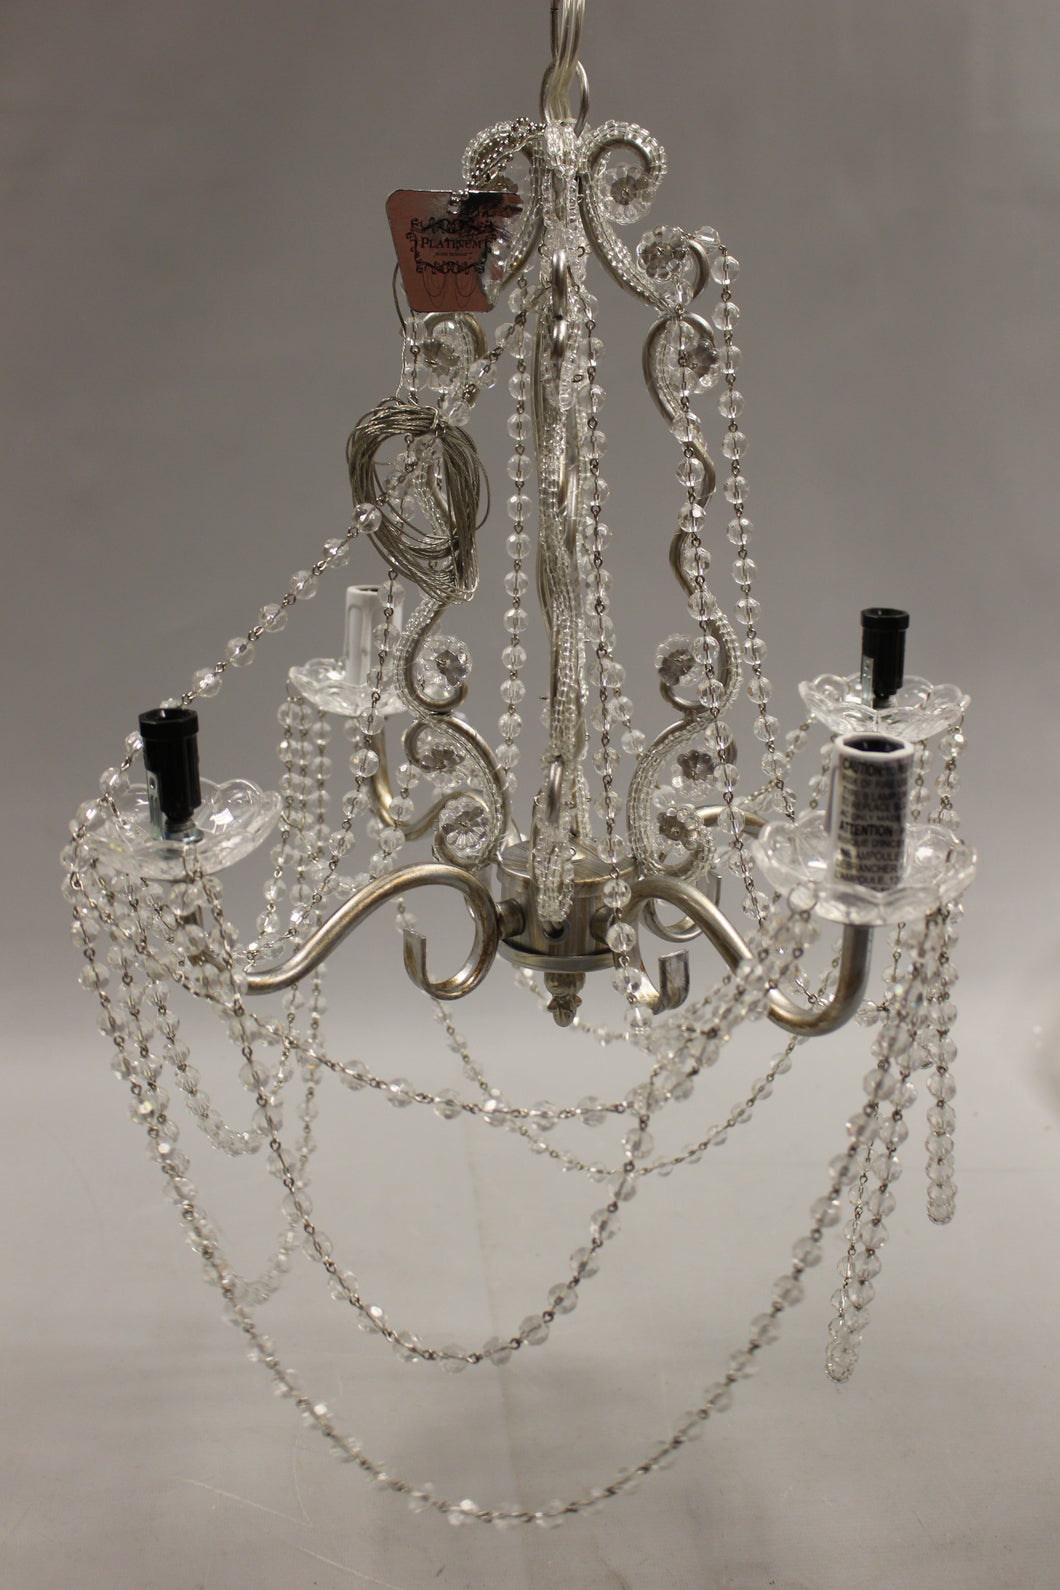 Tiffany Collection All Crystal Beaded Mini Swag Chandelier W/ 4 Lights - Silver